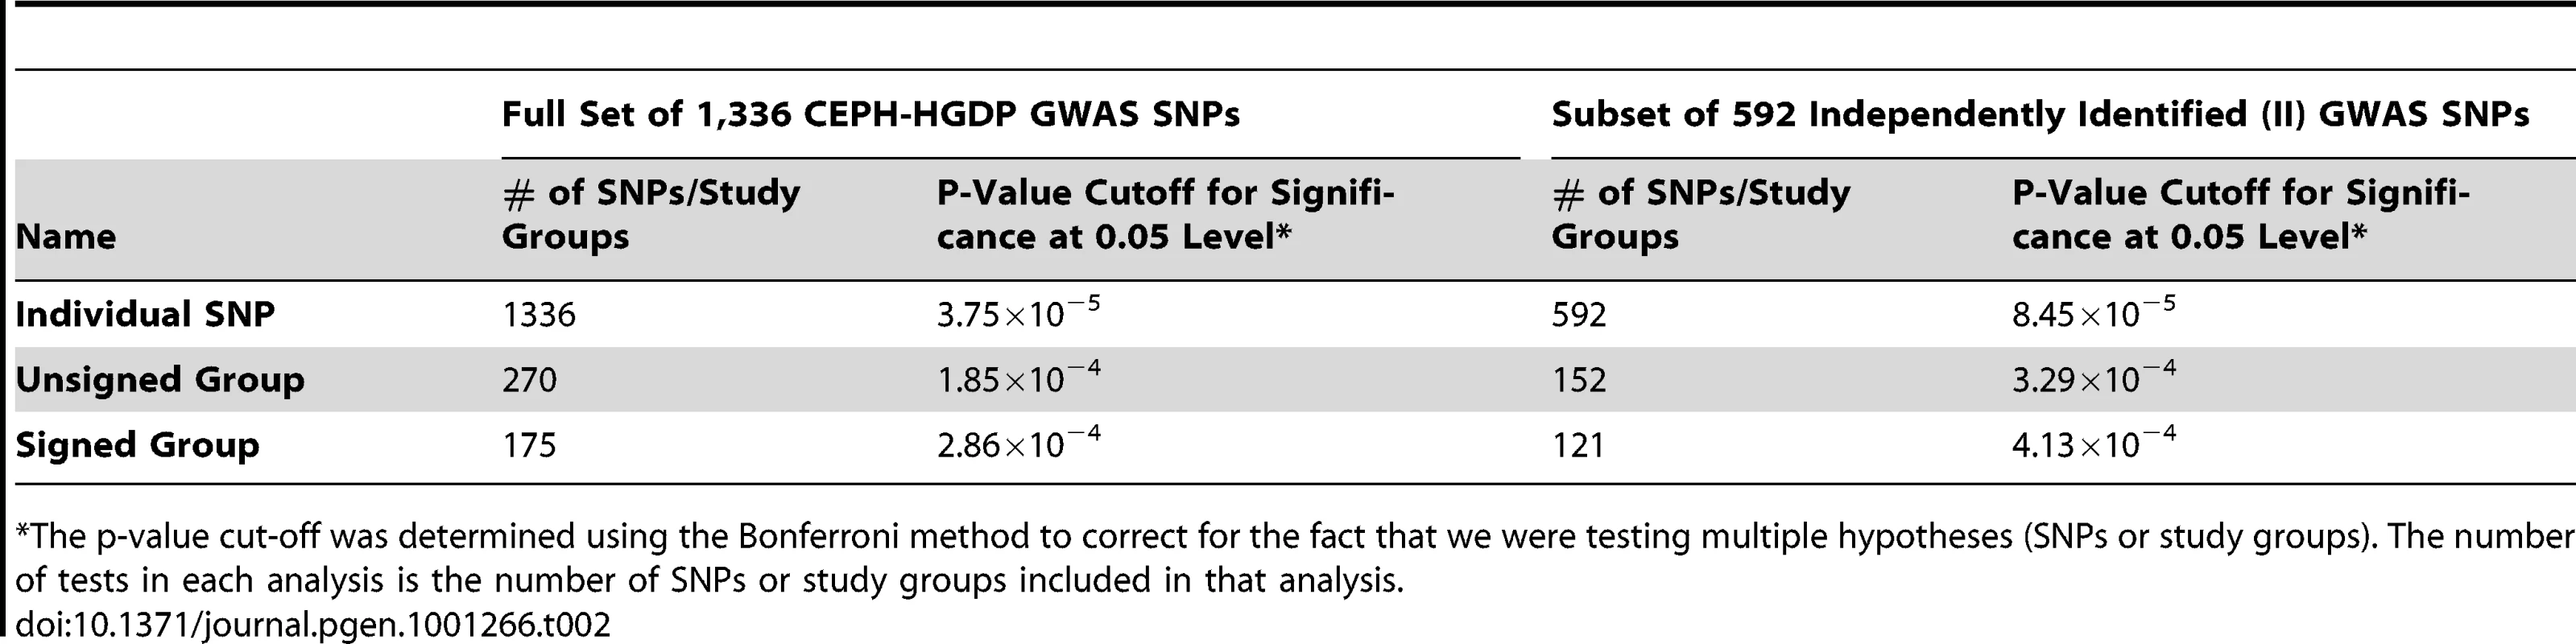 Number of SNPs/study groups tested in each analysis.